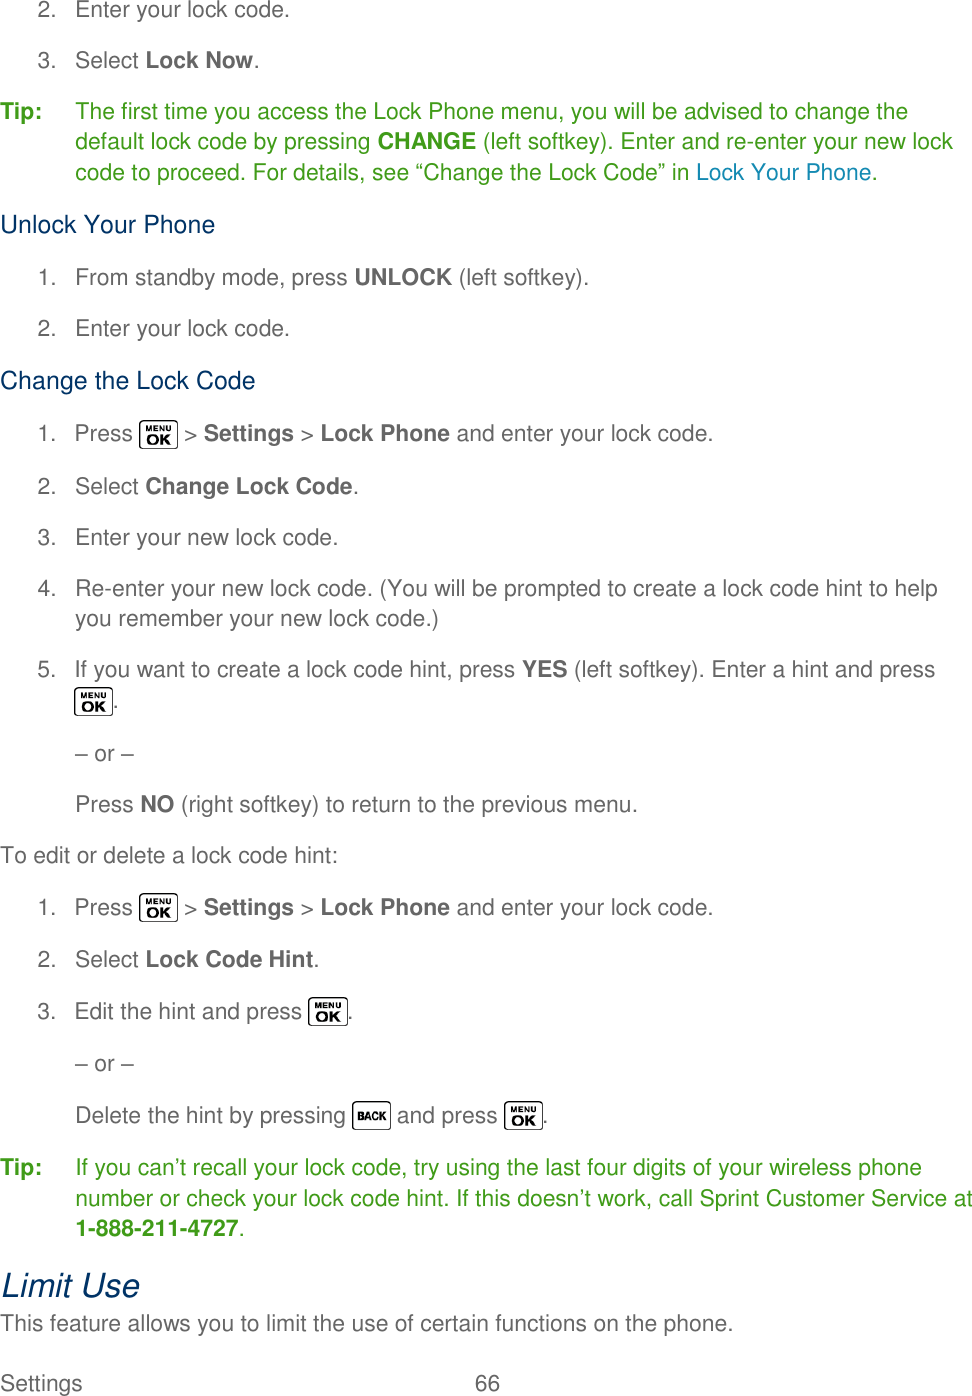  Settings  66   2.  Enter your lock code. 3.  Select Lock Now. Tip:  The first time you access the Lock Phone menu, you will be advised to change the default lock code by pressing CHANGE (left softkey). Enter and re-enter your new lock code to proceed. For details, see ―Change the Lock Code‖ in Lock Your Phone. Unlock Your Phone 1.  From standby mode, press UNLOCK (left softkey). 2.  Enter your lock code. Change the Lock Code 1.  Press   &gt; Settings &gt; Lock Phone and enter your lock code. 2.  Select Change Lock Code. 3.  Enter your new lock code. 4. Re-enter your new lock code. (You will be prompted to create a lock code hint to help you remember your new lock code.) 5.  If you want to create a lock code hint, press YES (left softkey). Enter a hint and press . – or – Press NO (right softkey) to return to the previous menu. To edit or delete a lock code hint: 1.  Press   &gt; Settings &gt; Lock Phone and enter your lock code. 2.  Select Lock Code Hint. 3.  Edit the hint and press  . – or – Delete the hint by pressing   and press  . Tip:  If you can‘t recall your lock code, try using the last four digits of your wireless phone number or check your lock code hint. If this doesn‘t work, call Sprint Customer Service at 1-888-211-4727. Limit Use This feature allows you to limit the use of certain functions on the phone. 